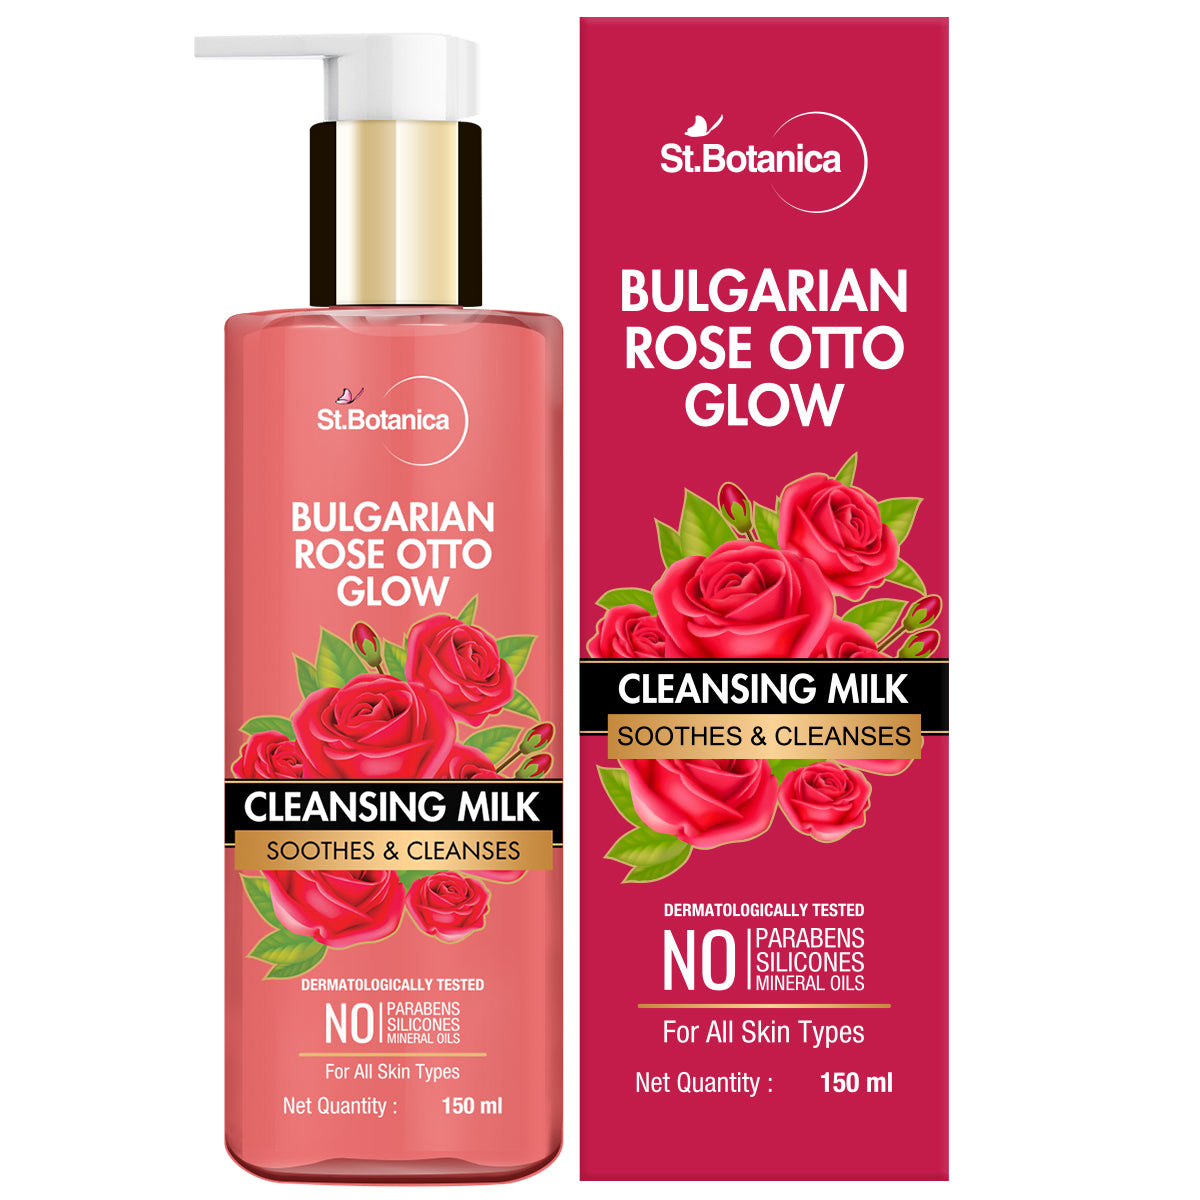 St.Botanica Bulgarian Rose Otto Glow Cleansing Milk Soothes & Cleanses No Paraben & Sls, 150 ml (STBOT679)